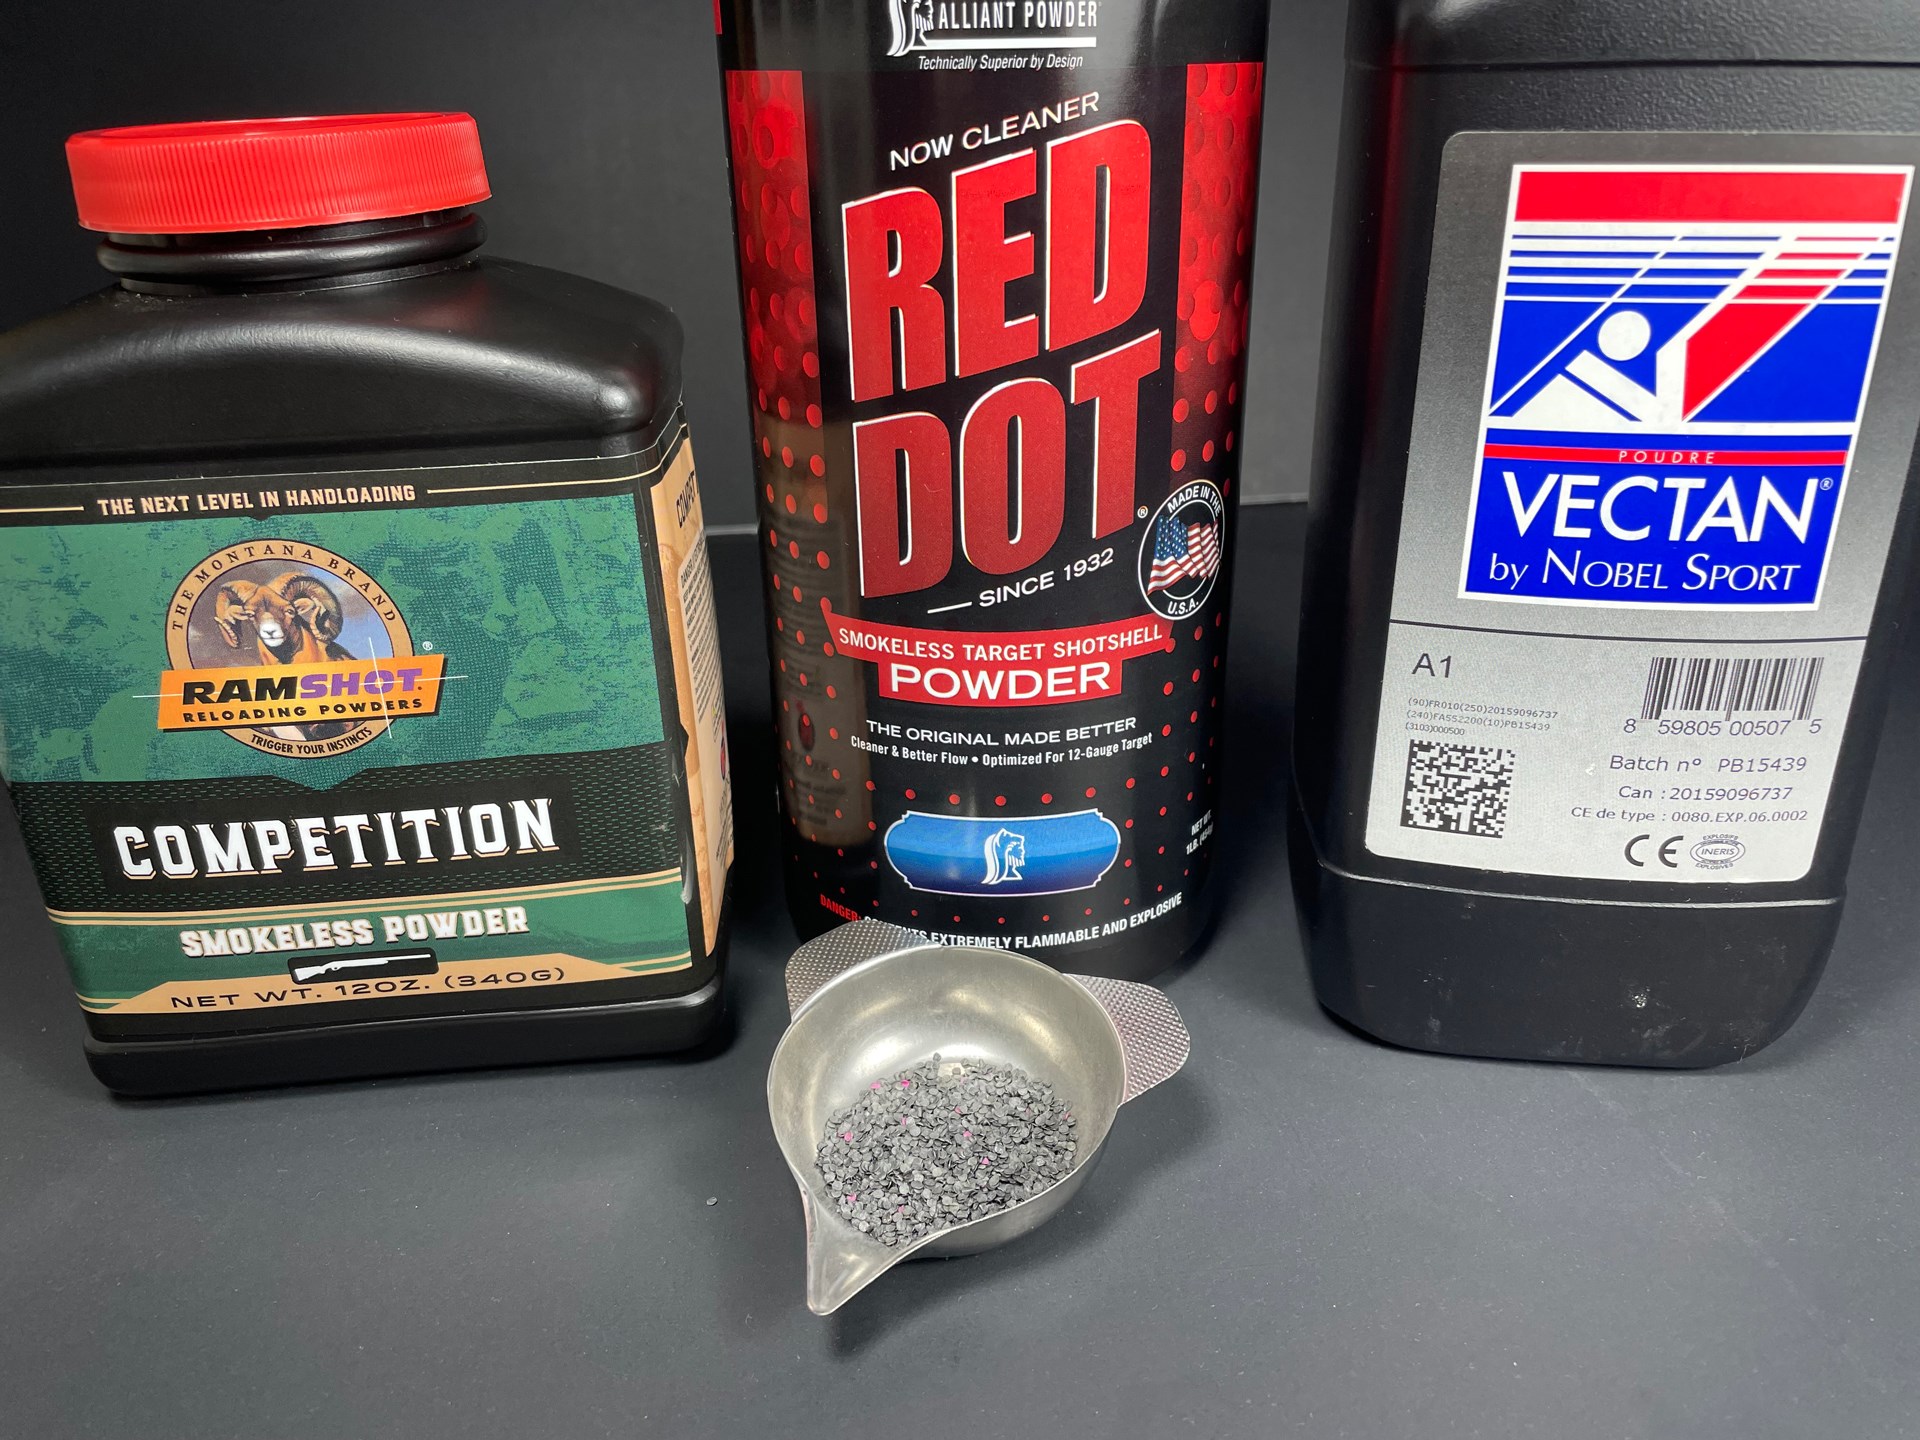 Flake-shaped propellants, such as Alliant Red Dot (c.) shown here, are typical of what’s used in shotshells. These sometimes pull double-duty for handgun ammunition.